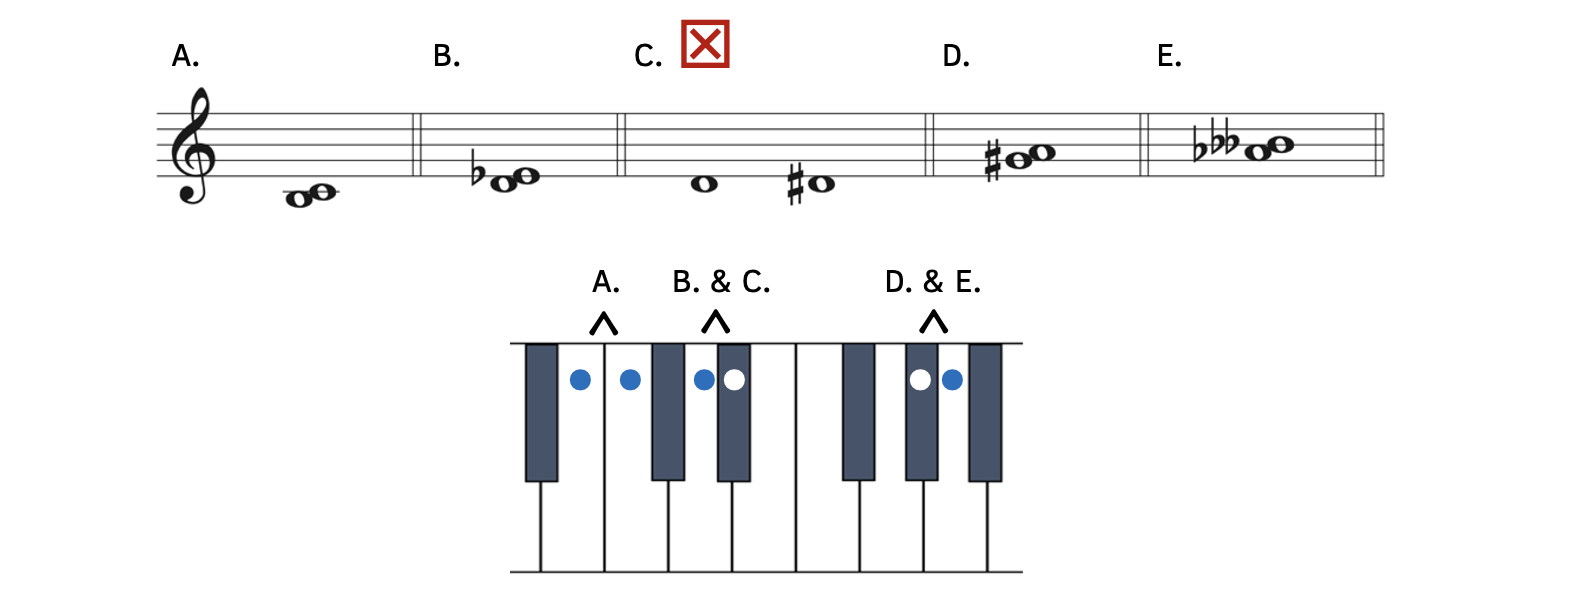 Example A is a half step and minor second from E to F. Example B is a half step and minor second from F to G-flat. Example C is a half step but not a minor second from D to D-sharp. Example D is a half step and minor second from G-sharp to A. Example E is a half step and minor second from A-flat to B-double flat.